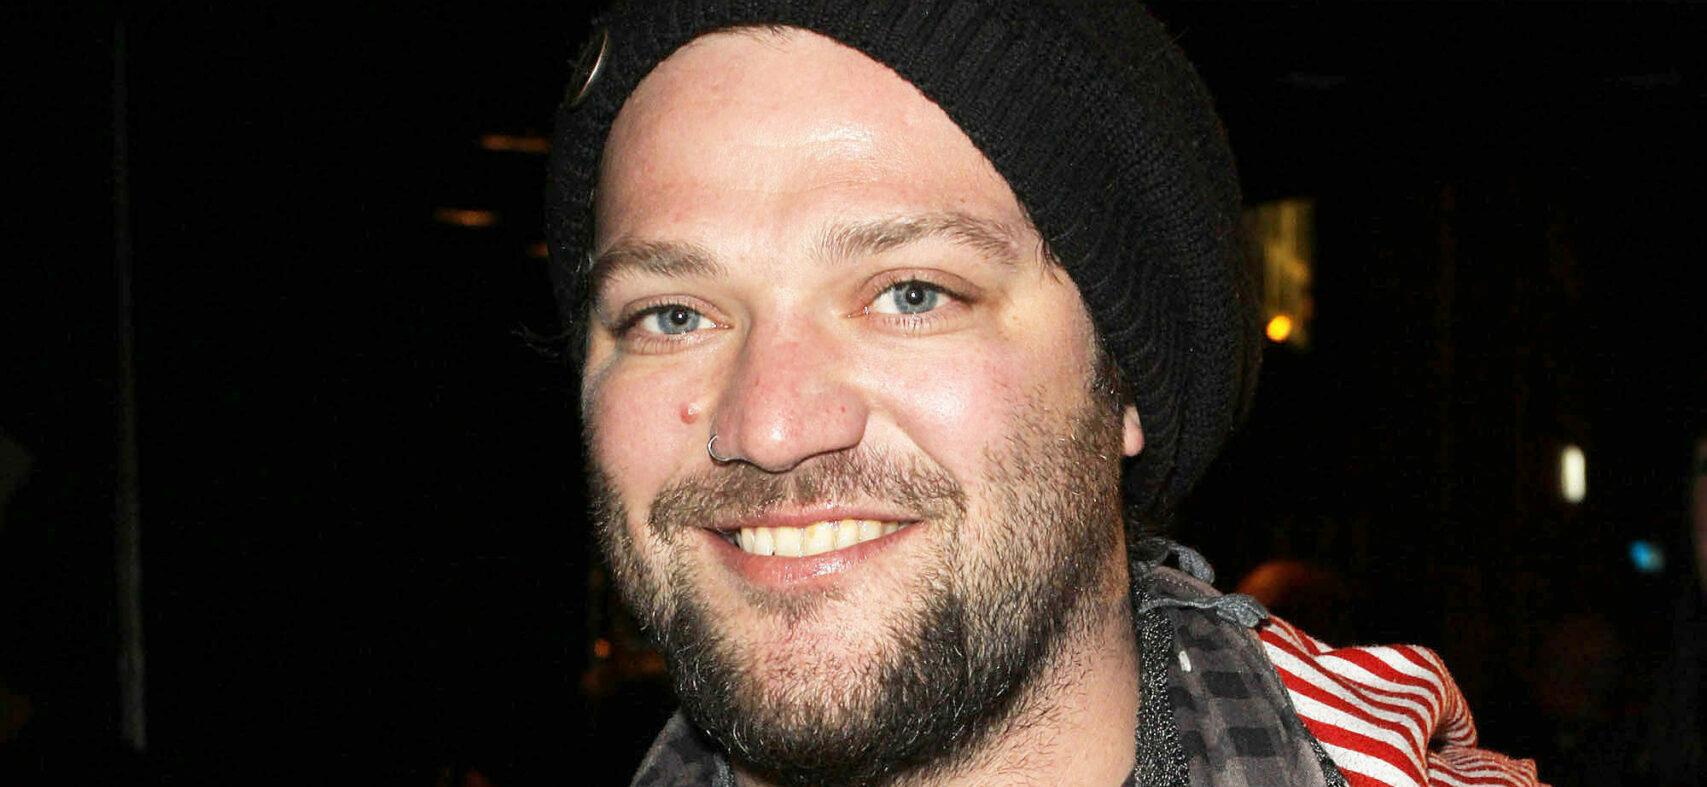 Bam Margera Vows To Binge On Drugs If He Is Refused Contact With His Son